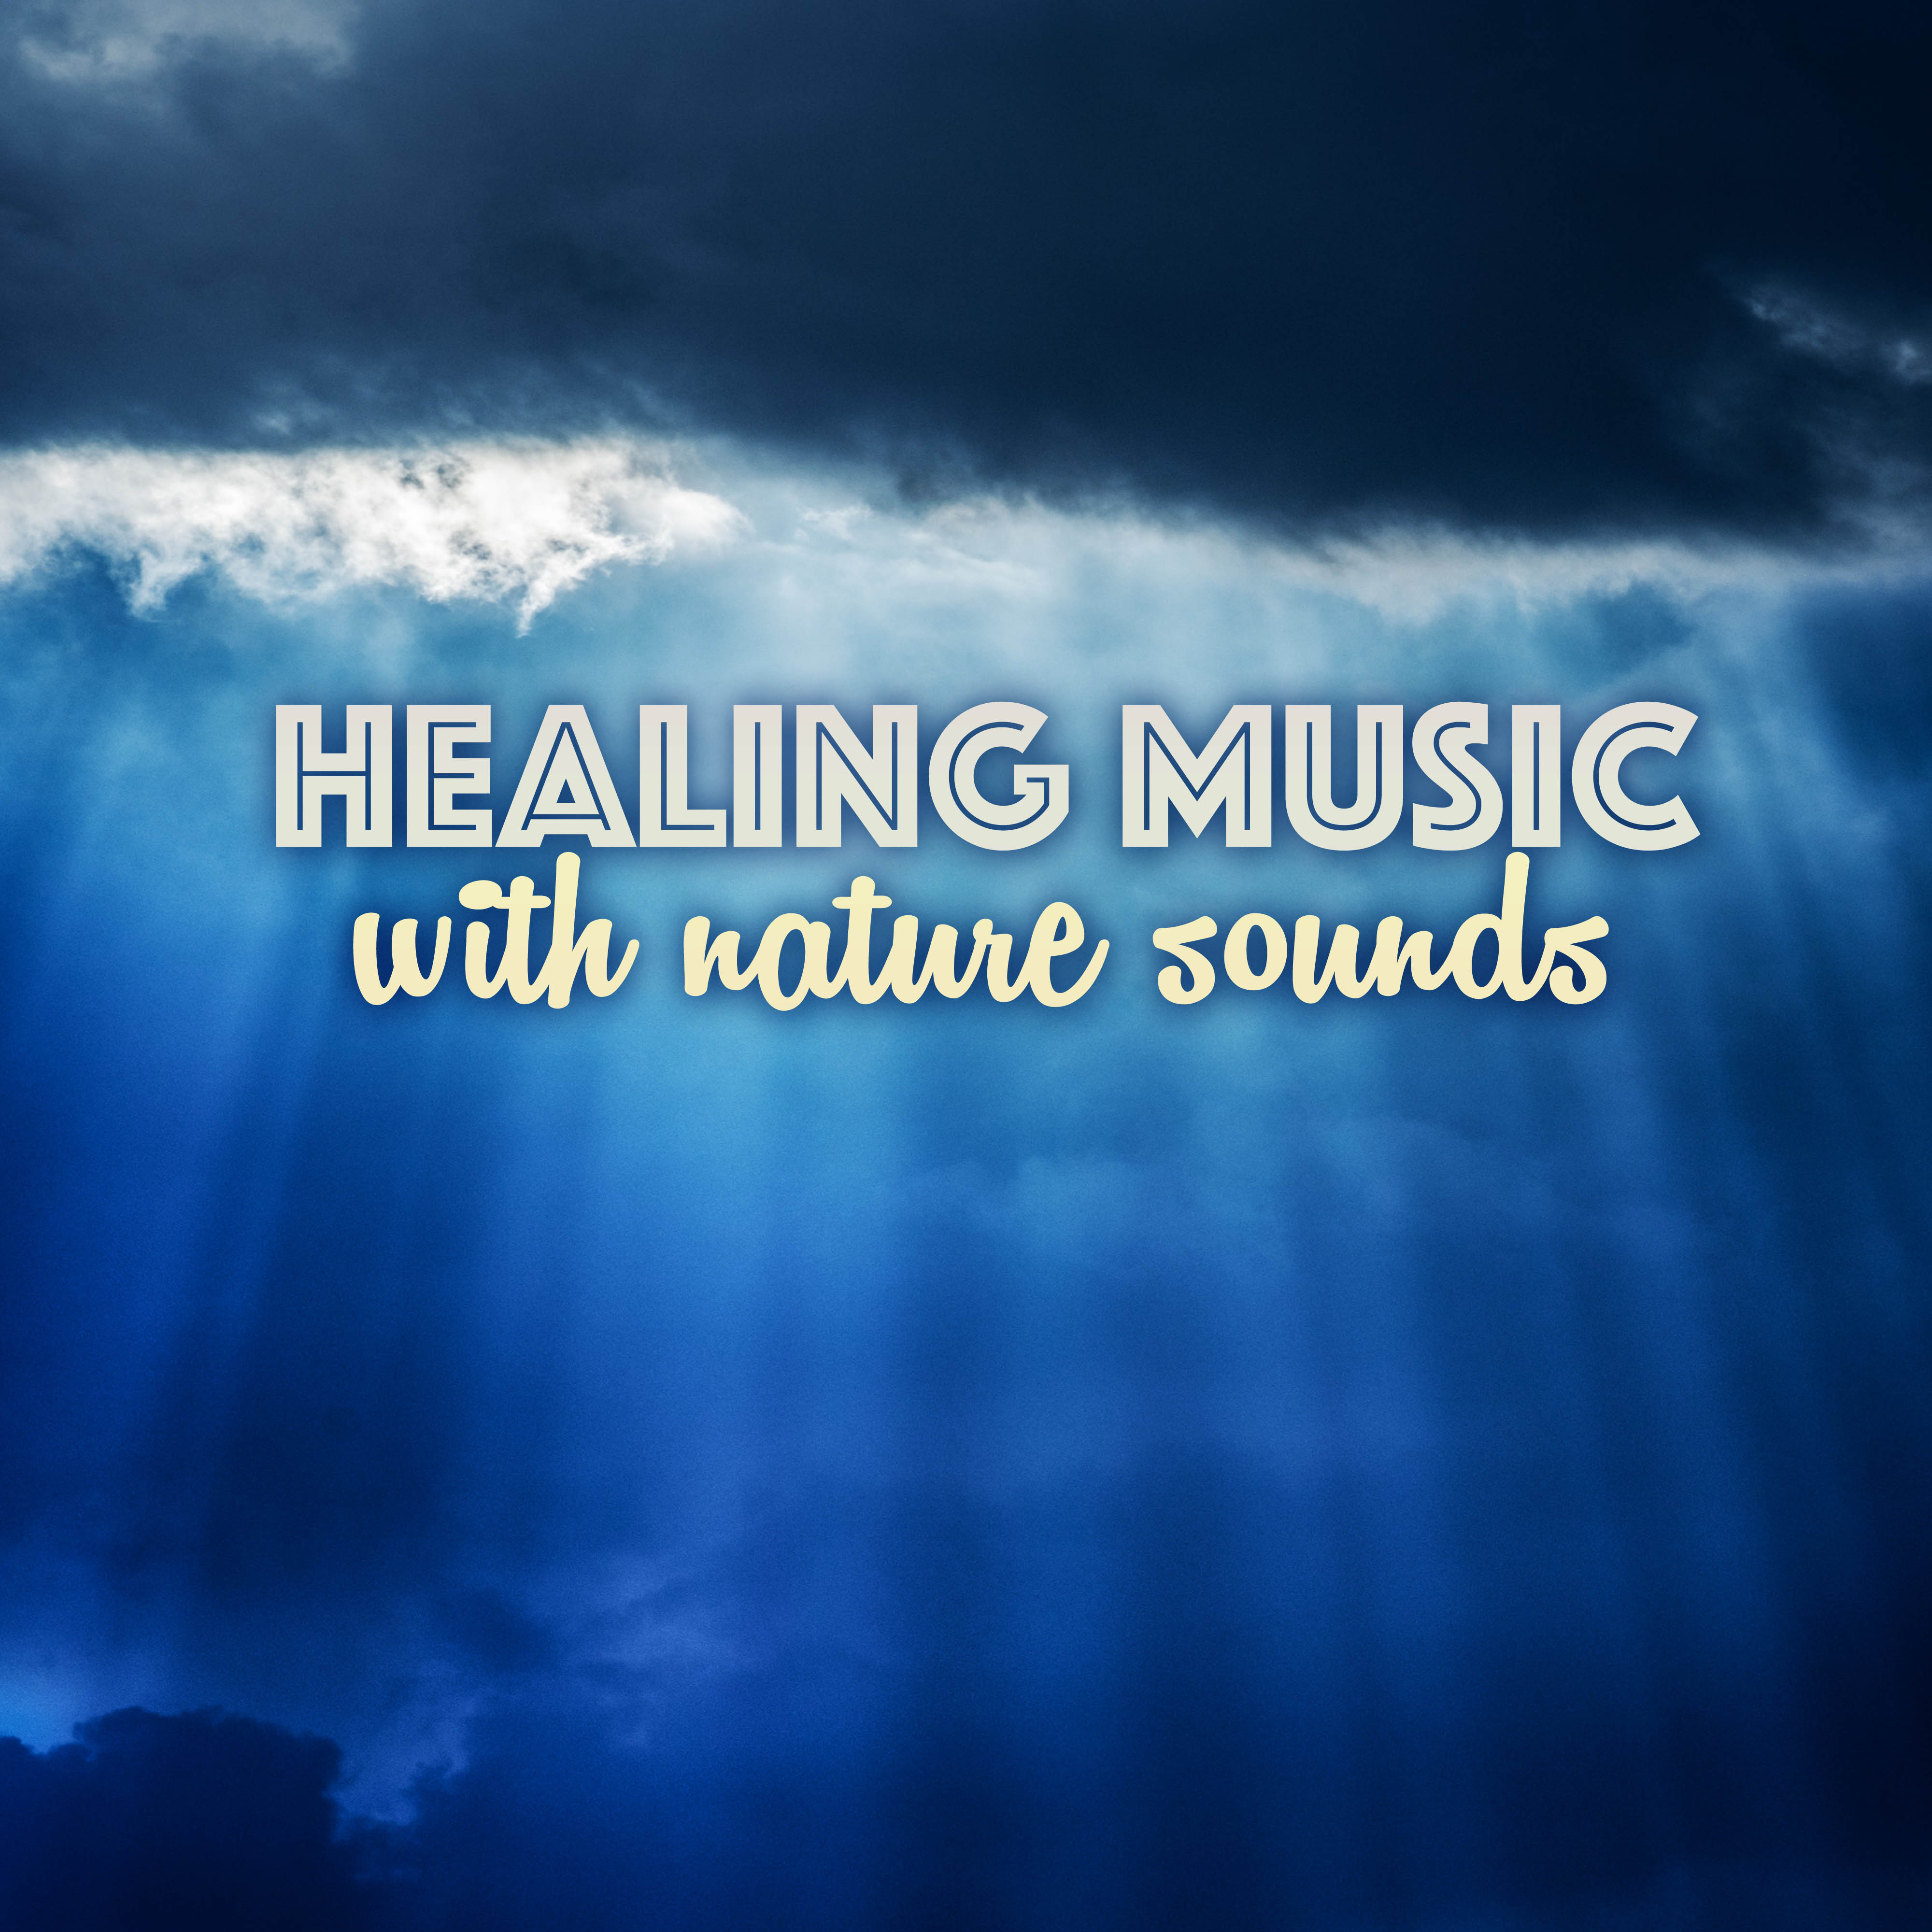 Healing Music with Nature Sounds - Relaxing Ocean Waves and Thunderstorm Lullaby